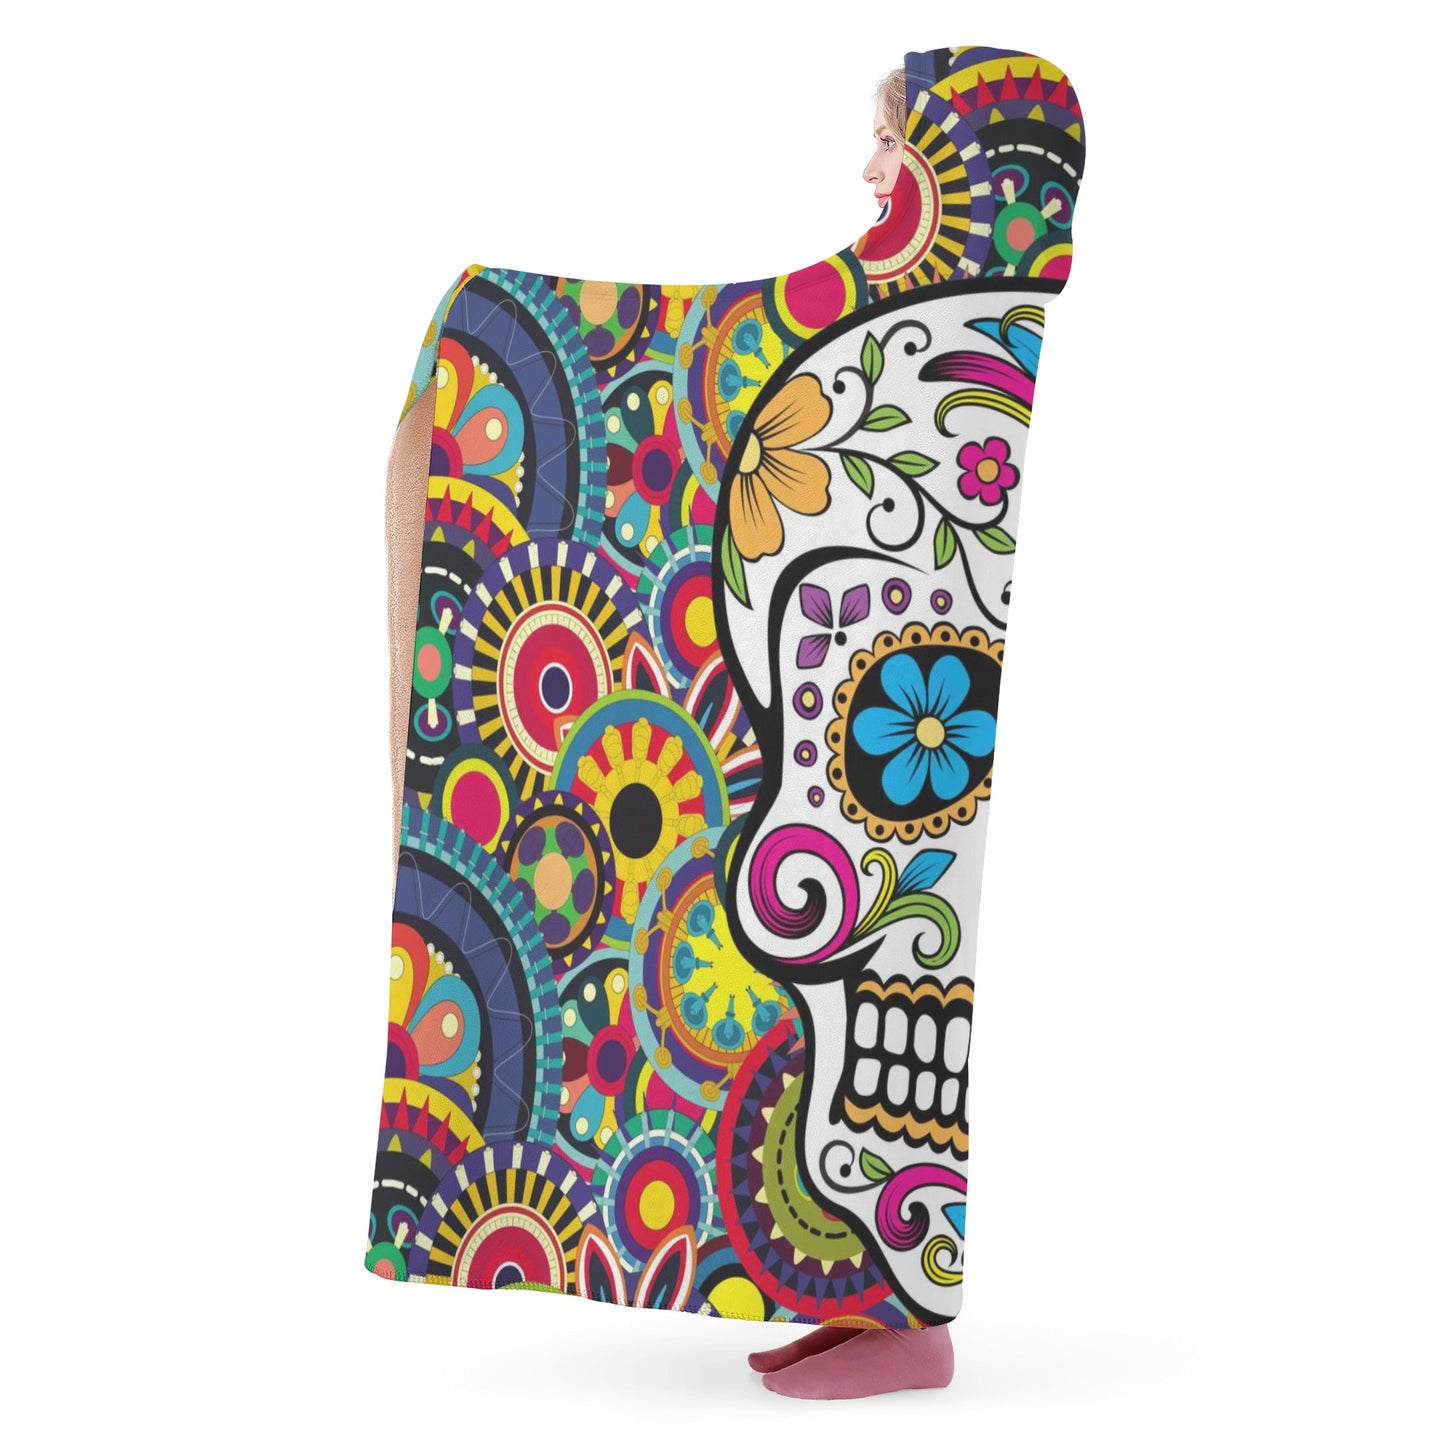 Floral day of the dead Hooded Blanket